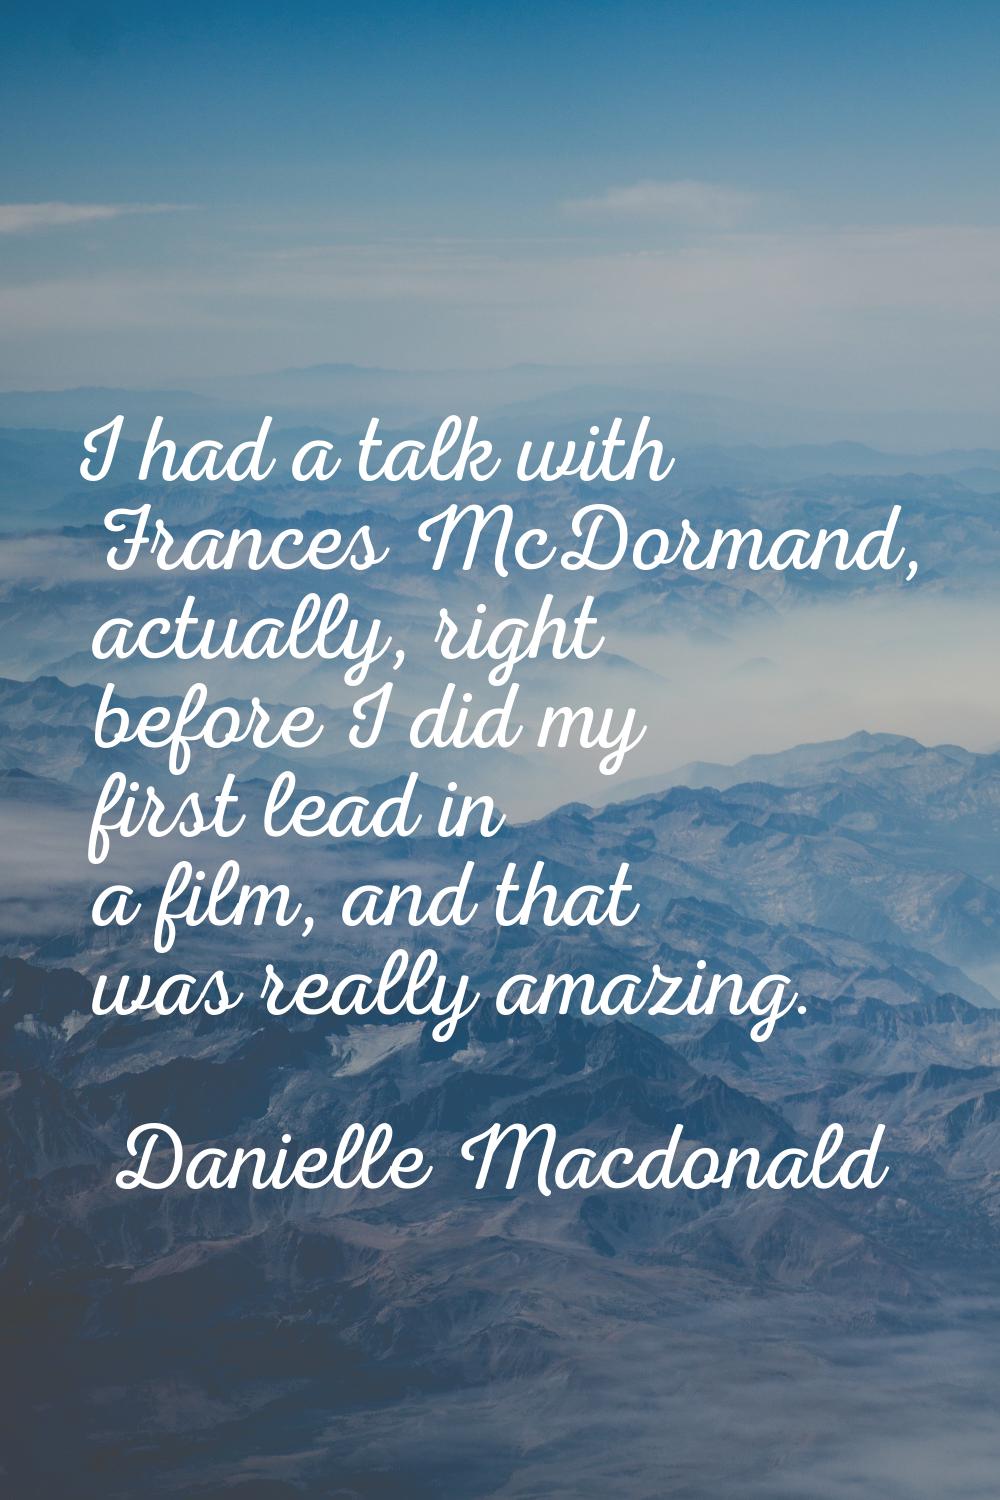 I had a talk with Frances McDormand, actually, right before I did my first lead in a film, and that